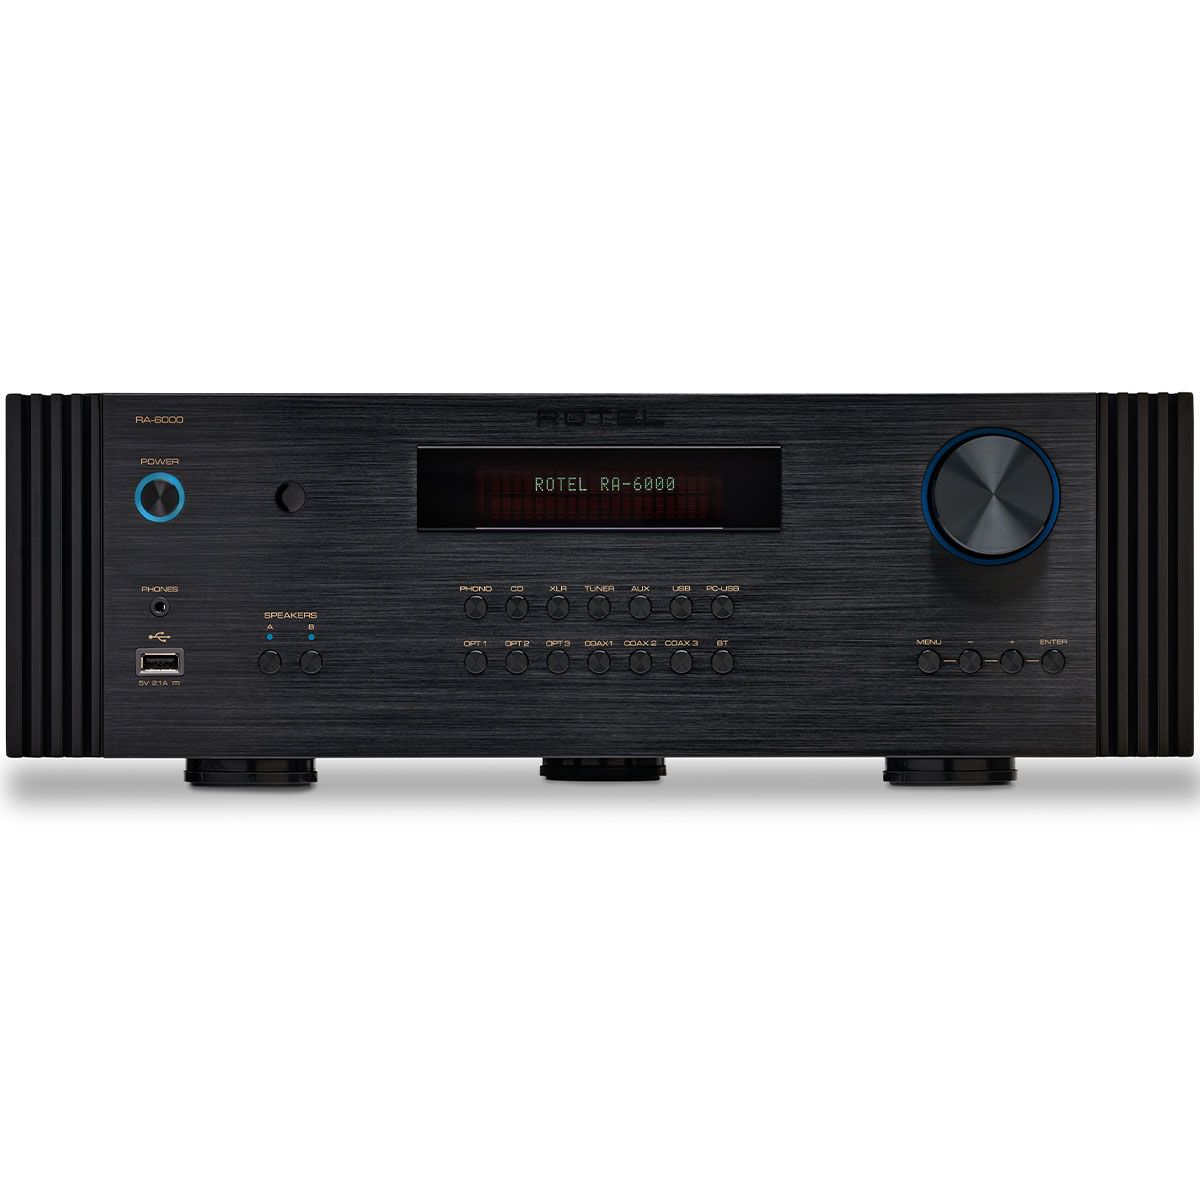 Rotel RA-6000 Integrated Amplifier - Black - front view